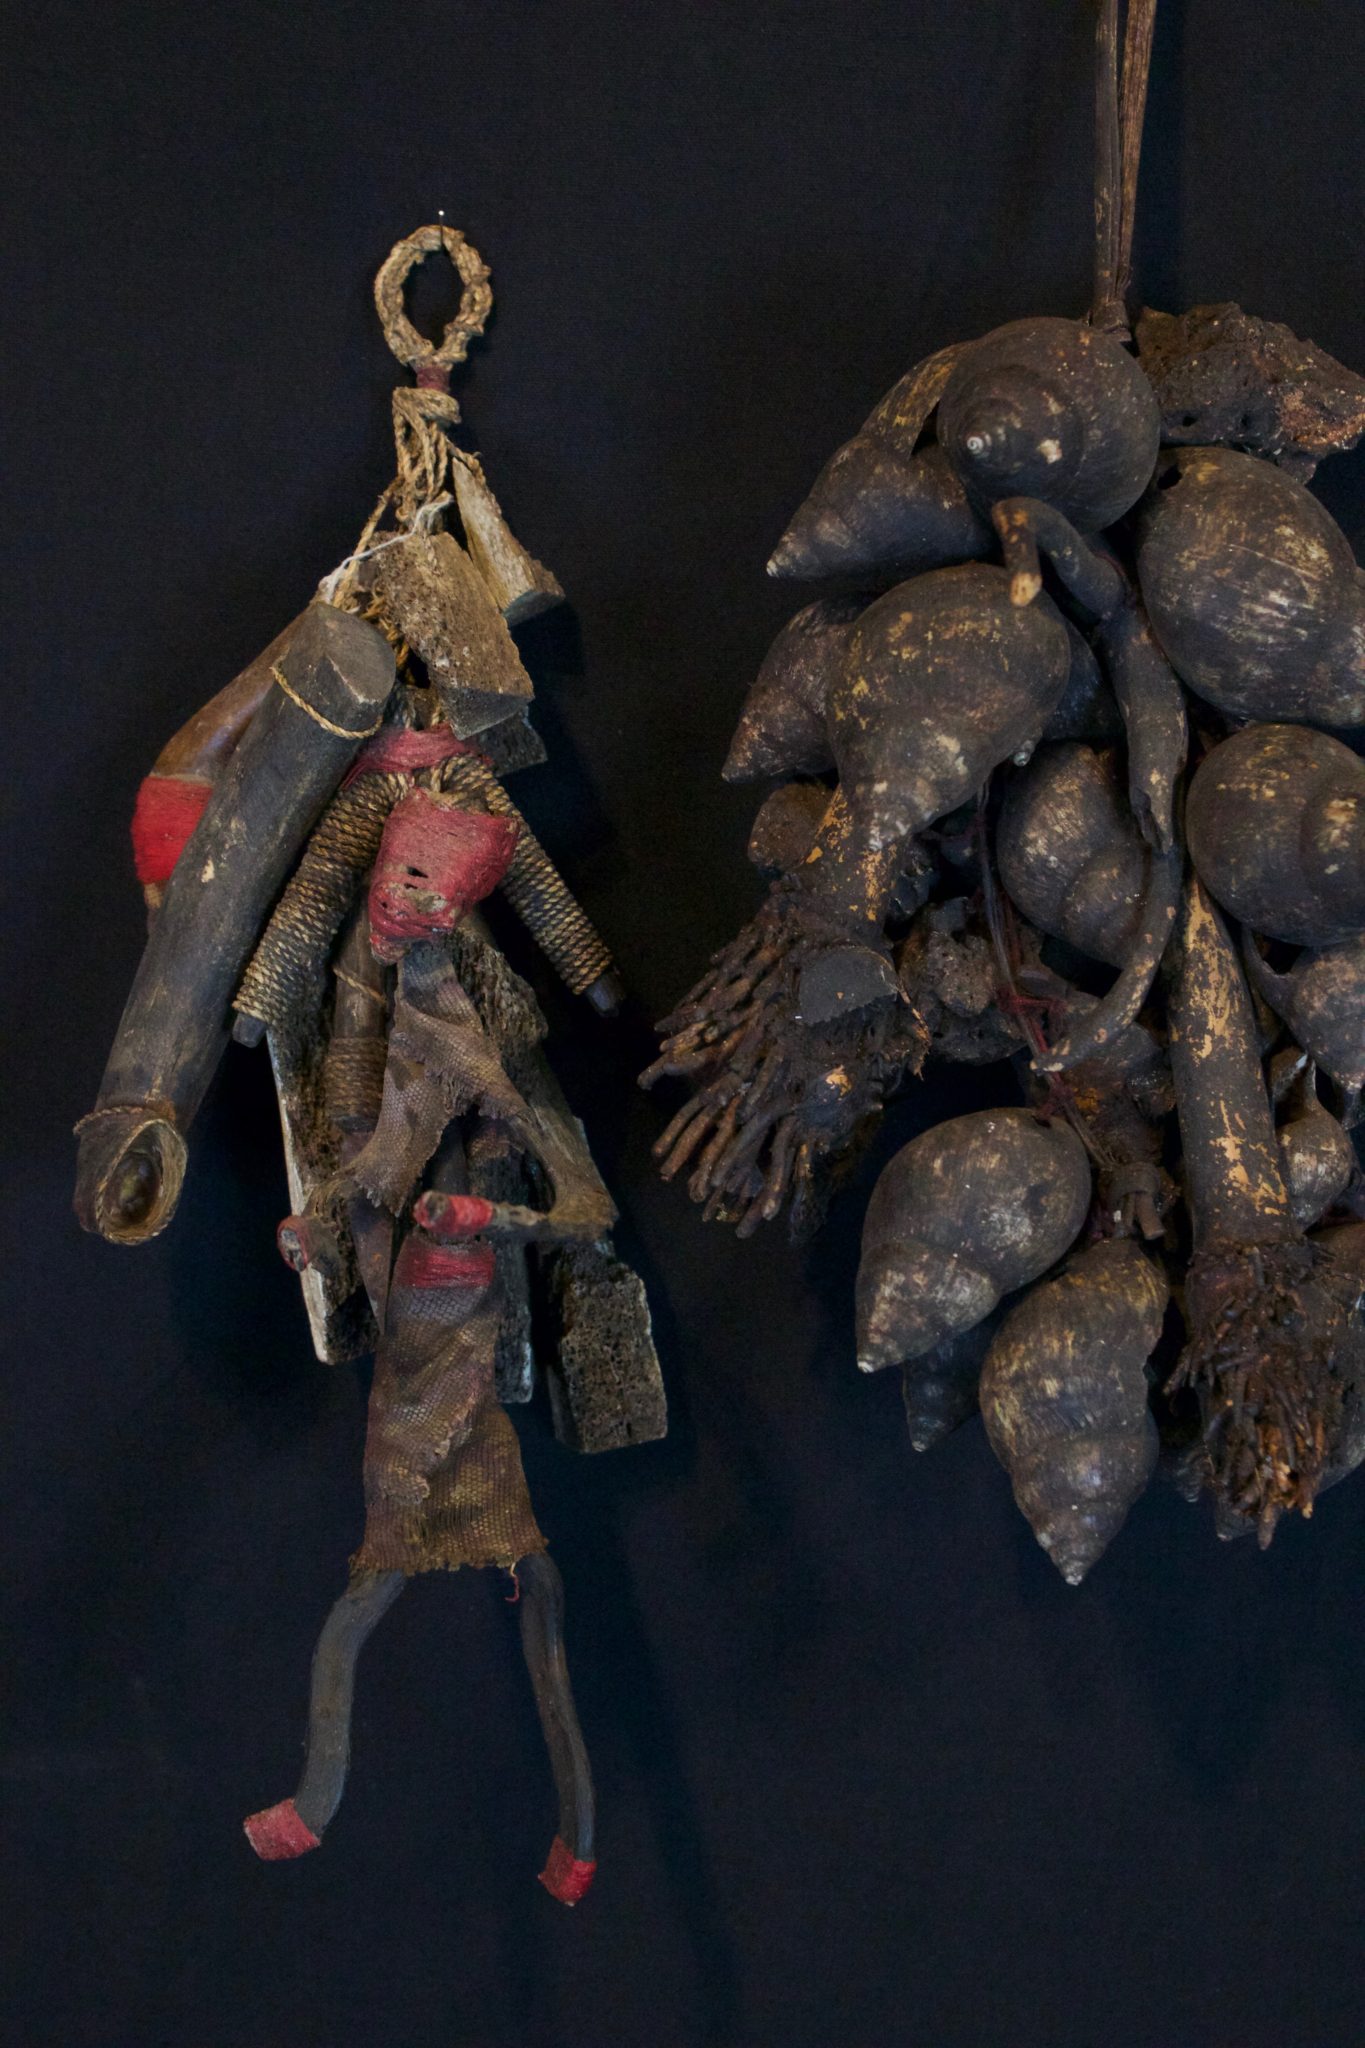 Shaman Healing Fetish Rattles, Lombok, Lesser Sunda Islands, Indonesia, Early to mid 20th c, Wood pigmented with soot, metal blade, cloth fiber, patinated with age and use. Used for healing rituals - Shaken to fend off harmful spirits. Dimensions: (left - 12” x 5 ½” x 4”, sold); (right - 14” x 7” x 6”, Sold)